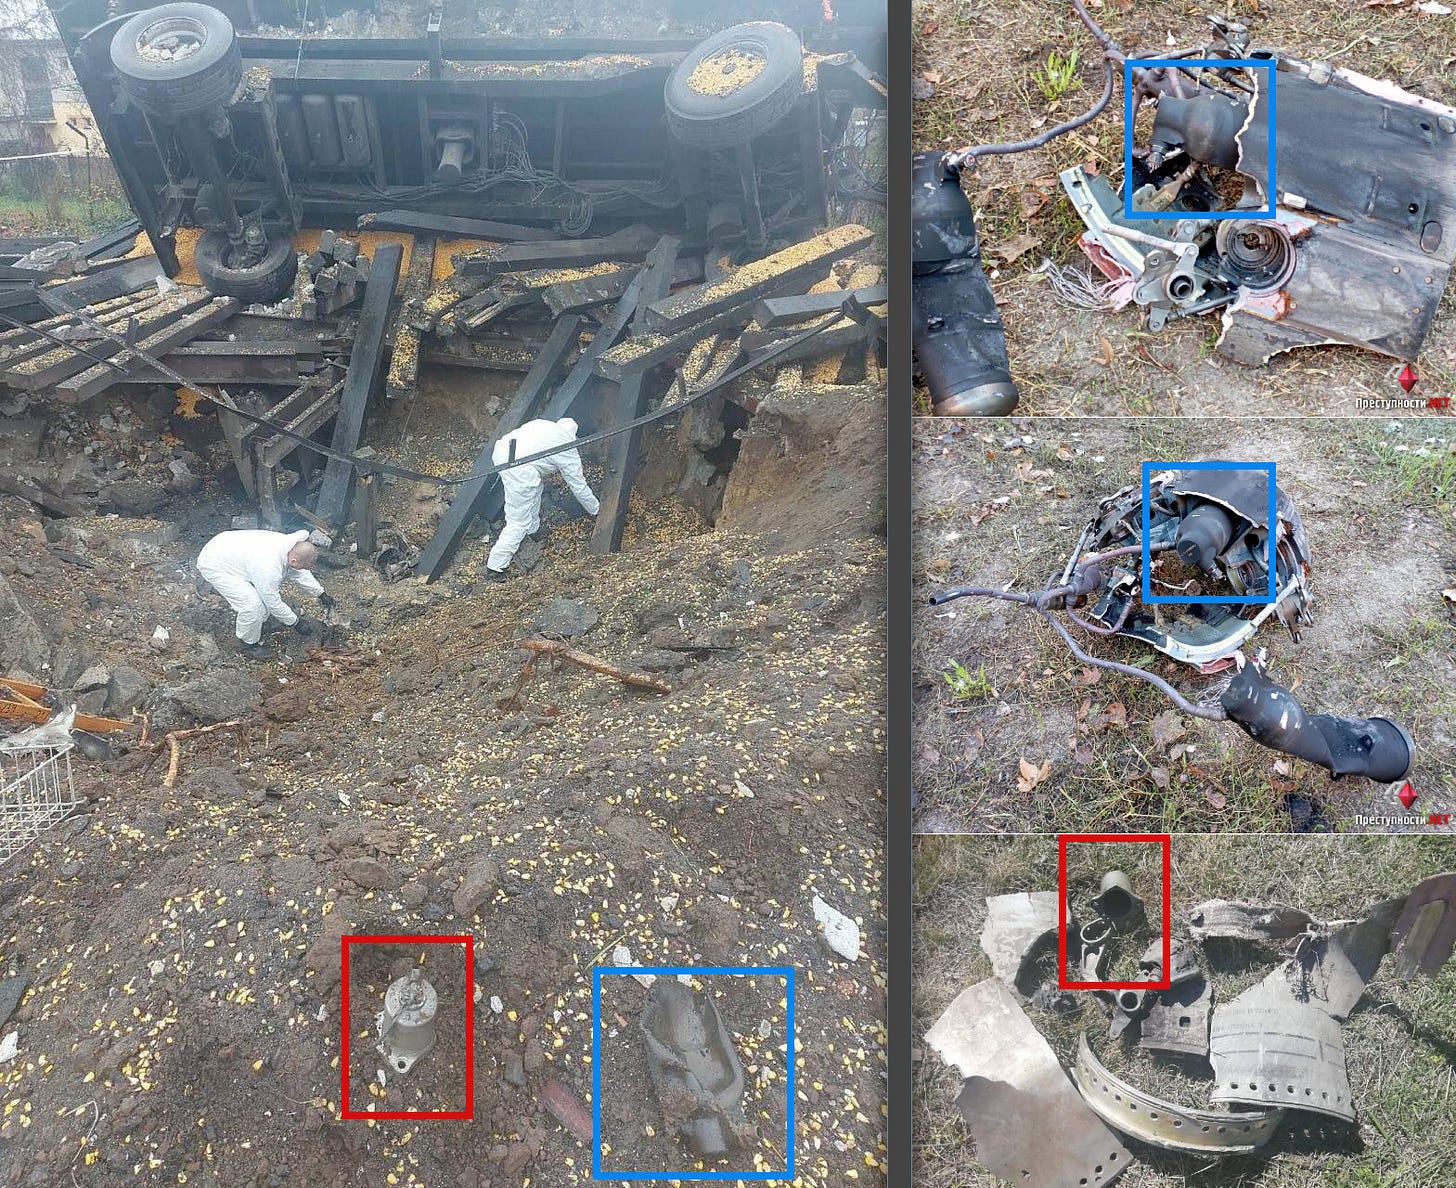 Image from impact site with debris compared with reference photos of 5V55 debris